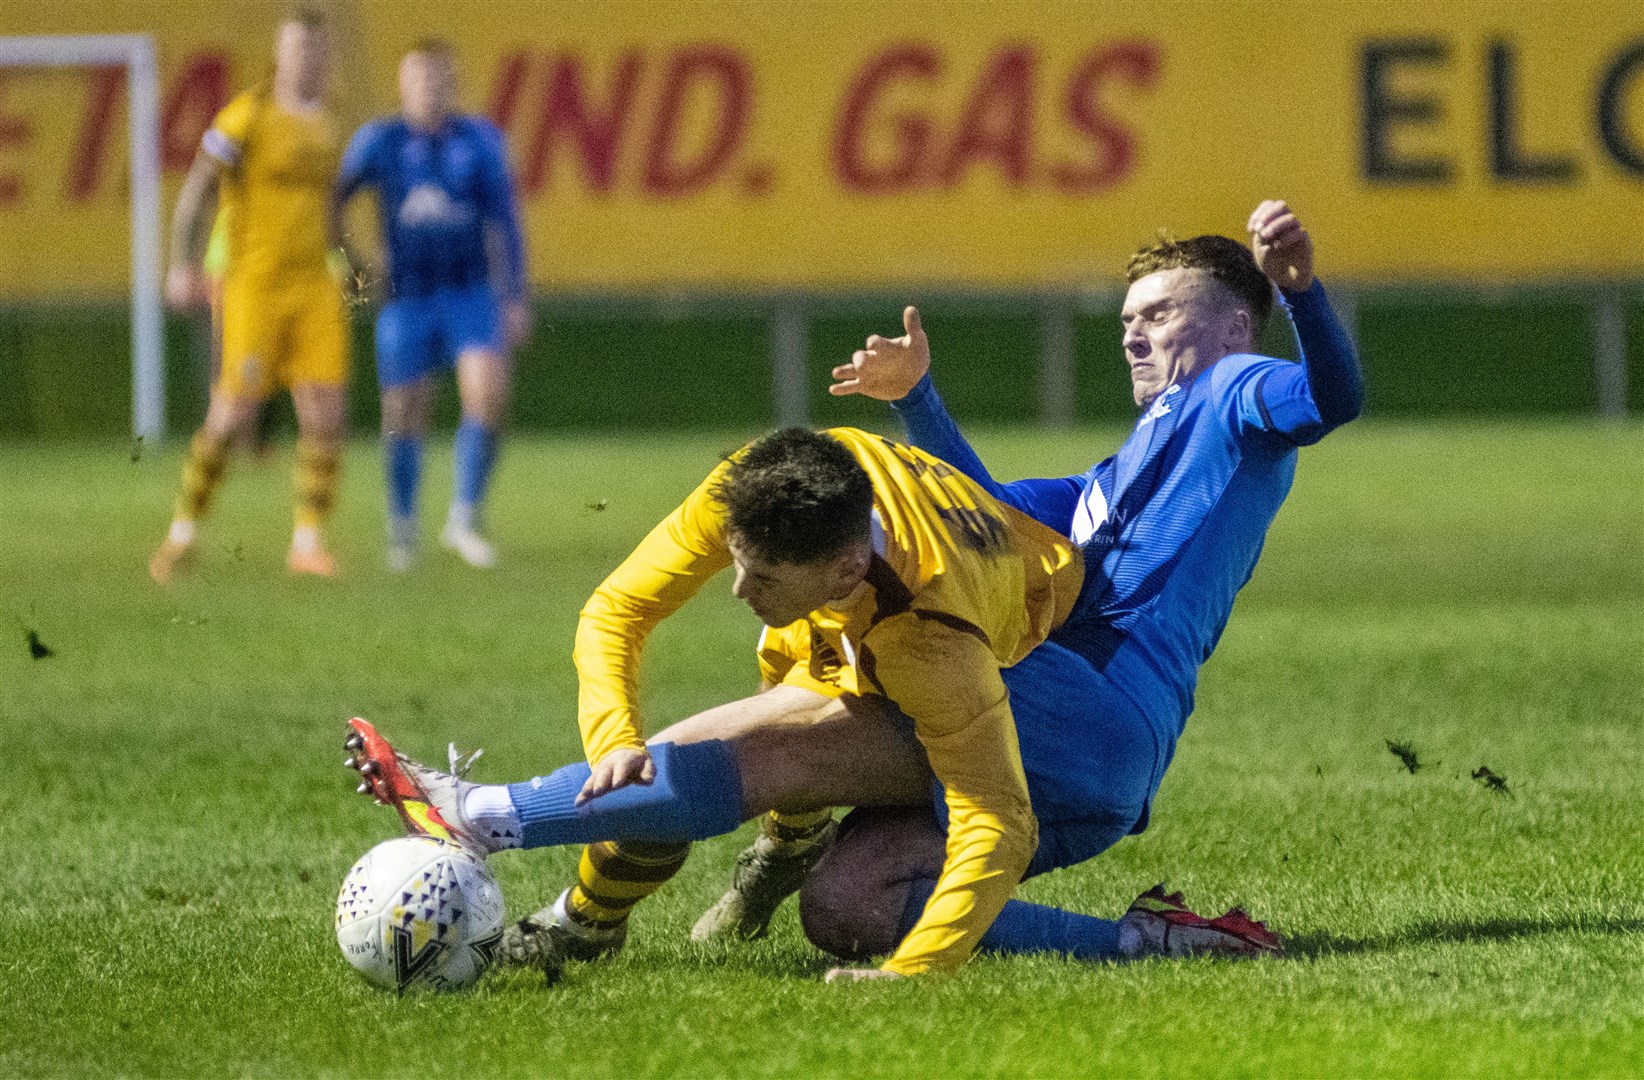 Strathspey's Liam McDade goes in for a challenge on Forres Mechanics' Thomas Brady...Forres Mechanics FC (8) vs Strathspey Thistle FC (1) - Highland Football League 22/23 - Mosset Park, Forres 07/01/23...Picture: Daniel Forsyth..